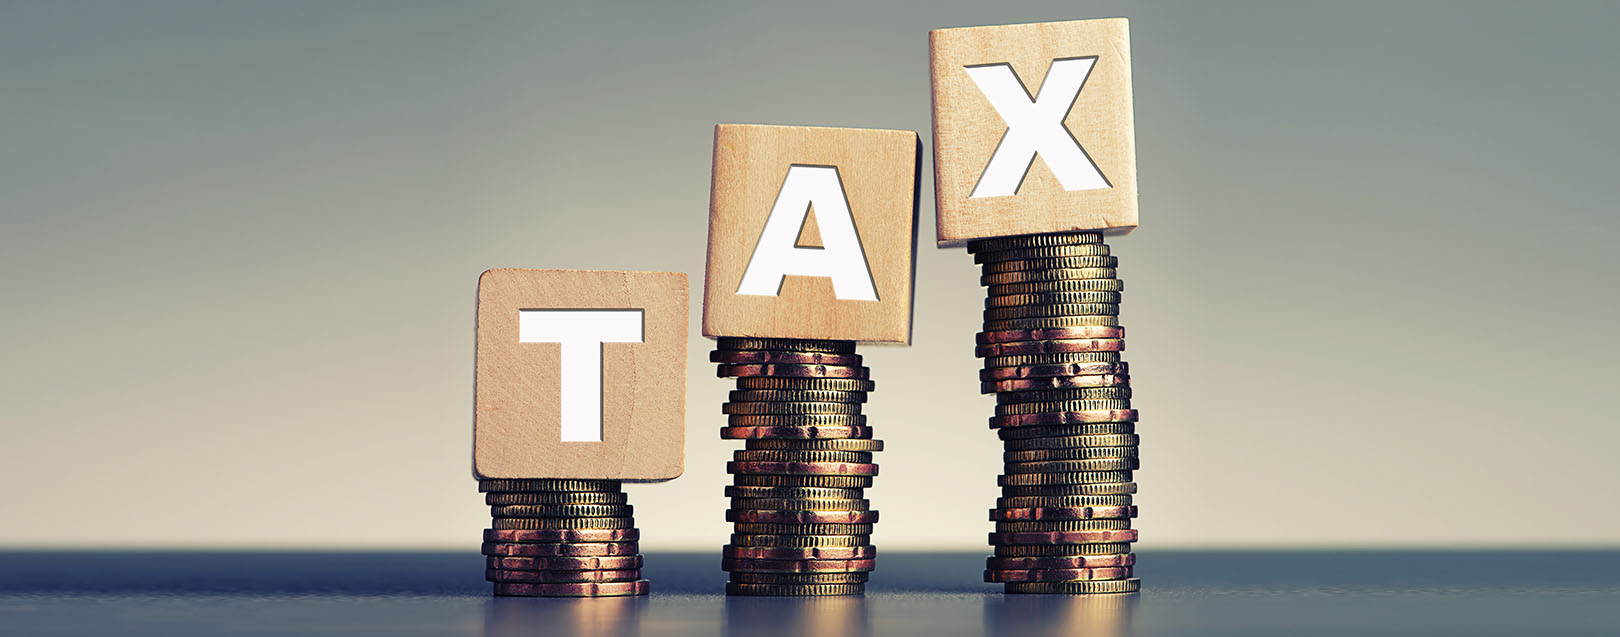 Direct tax collections show growth of 18.2% up to Dec